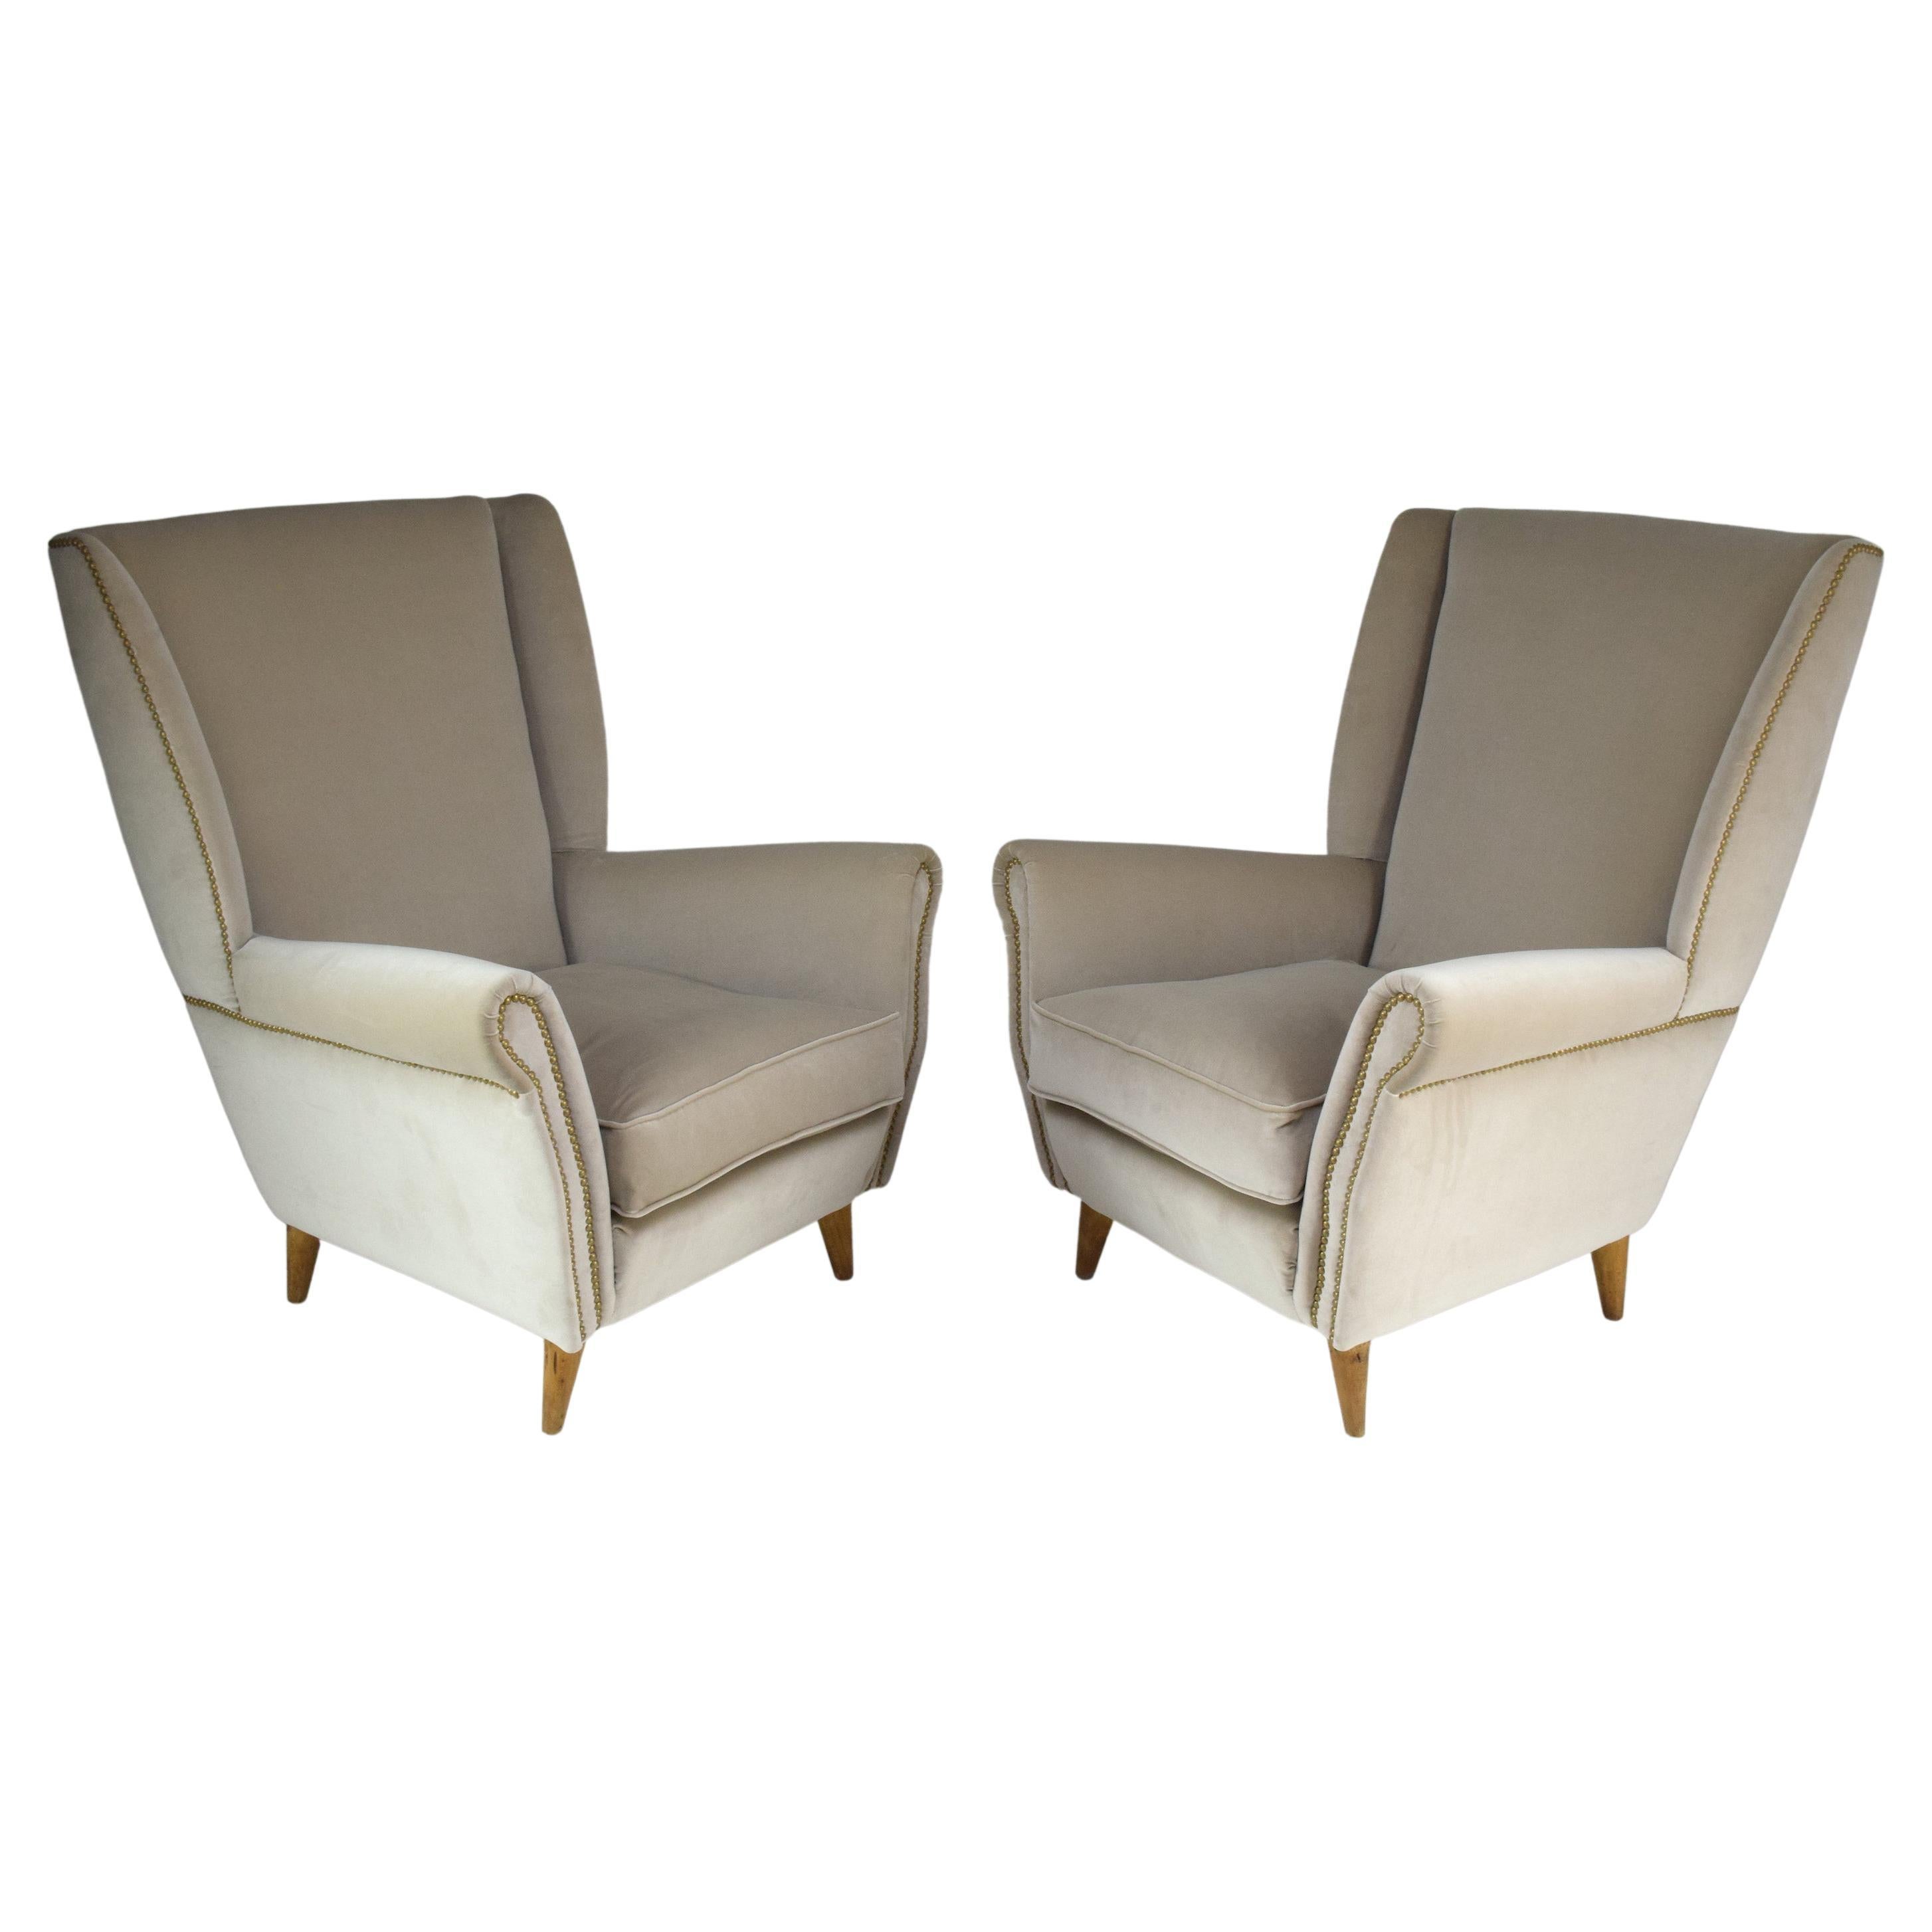 Pair of 20th Century Armchairs In the Style of Gio Ponti, 1940s For Sale